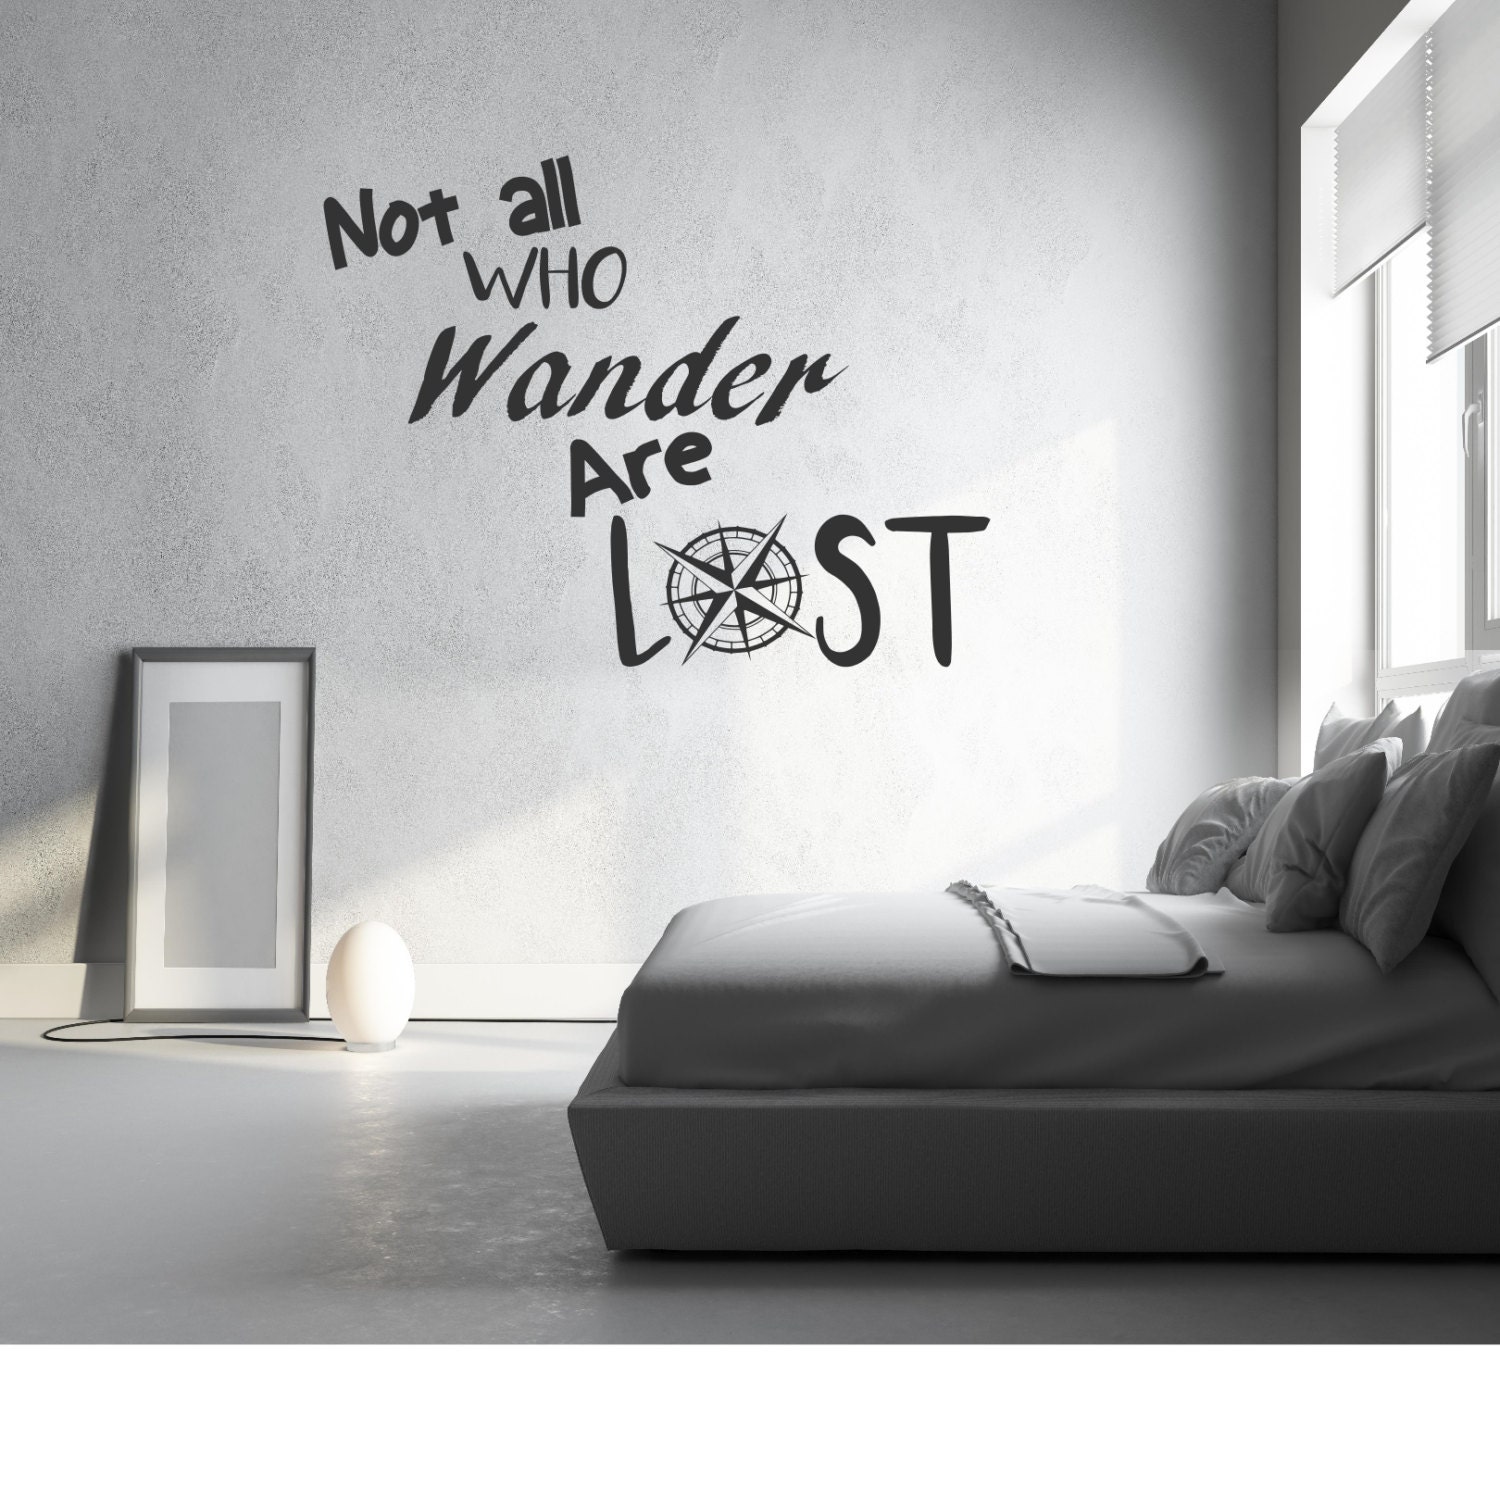 Not All Who Wander Are Lost Wall Decal Compass Decal - Etsy